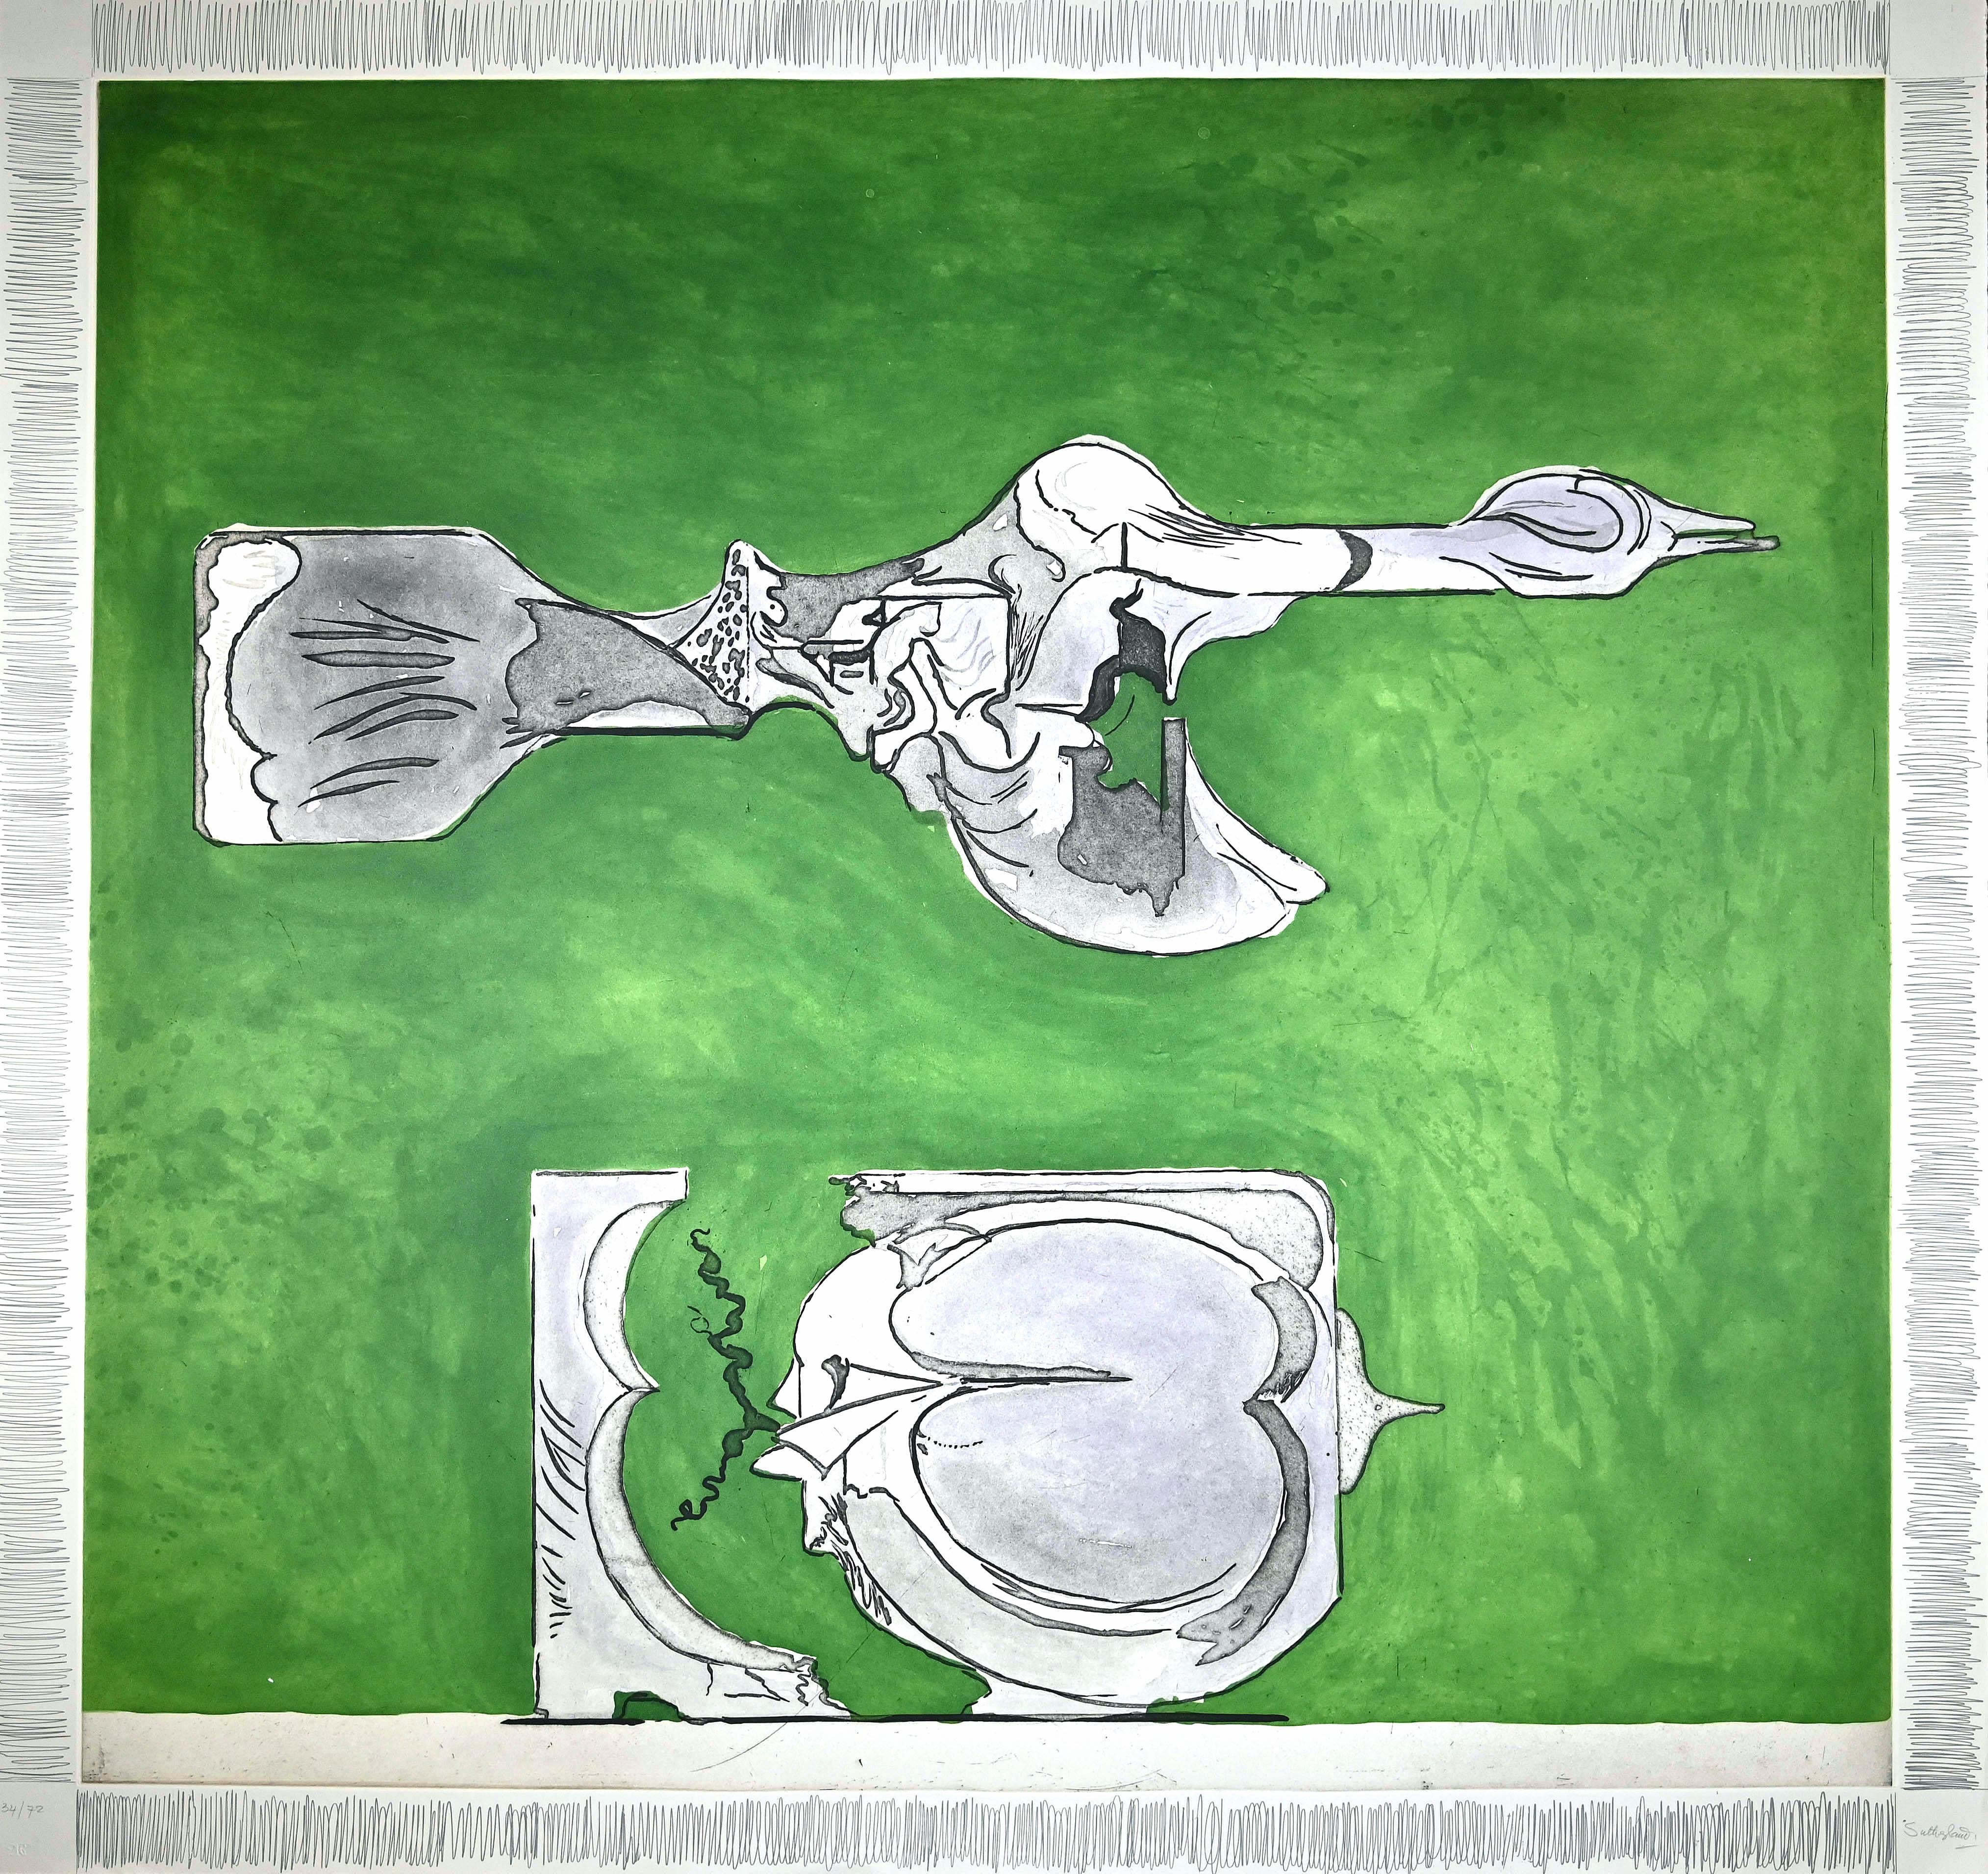 Untitled is an original Contemporary Artwork realized by Graham Sutherland (1903-1980) in 1974.

Original etching and aquatint on copper plate printed in 3 colors on Fabriano Rosaspina paper.

Hand-signed in pencil on the lower right corner: